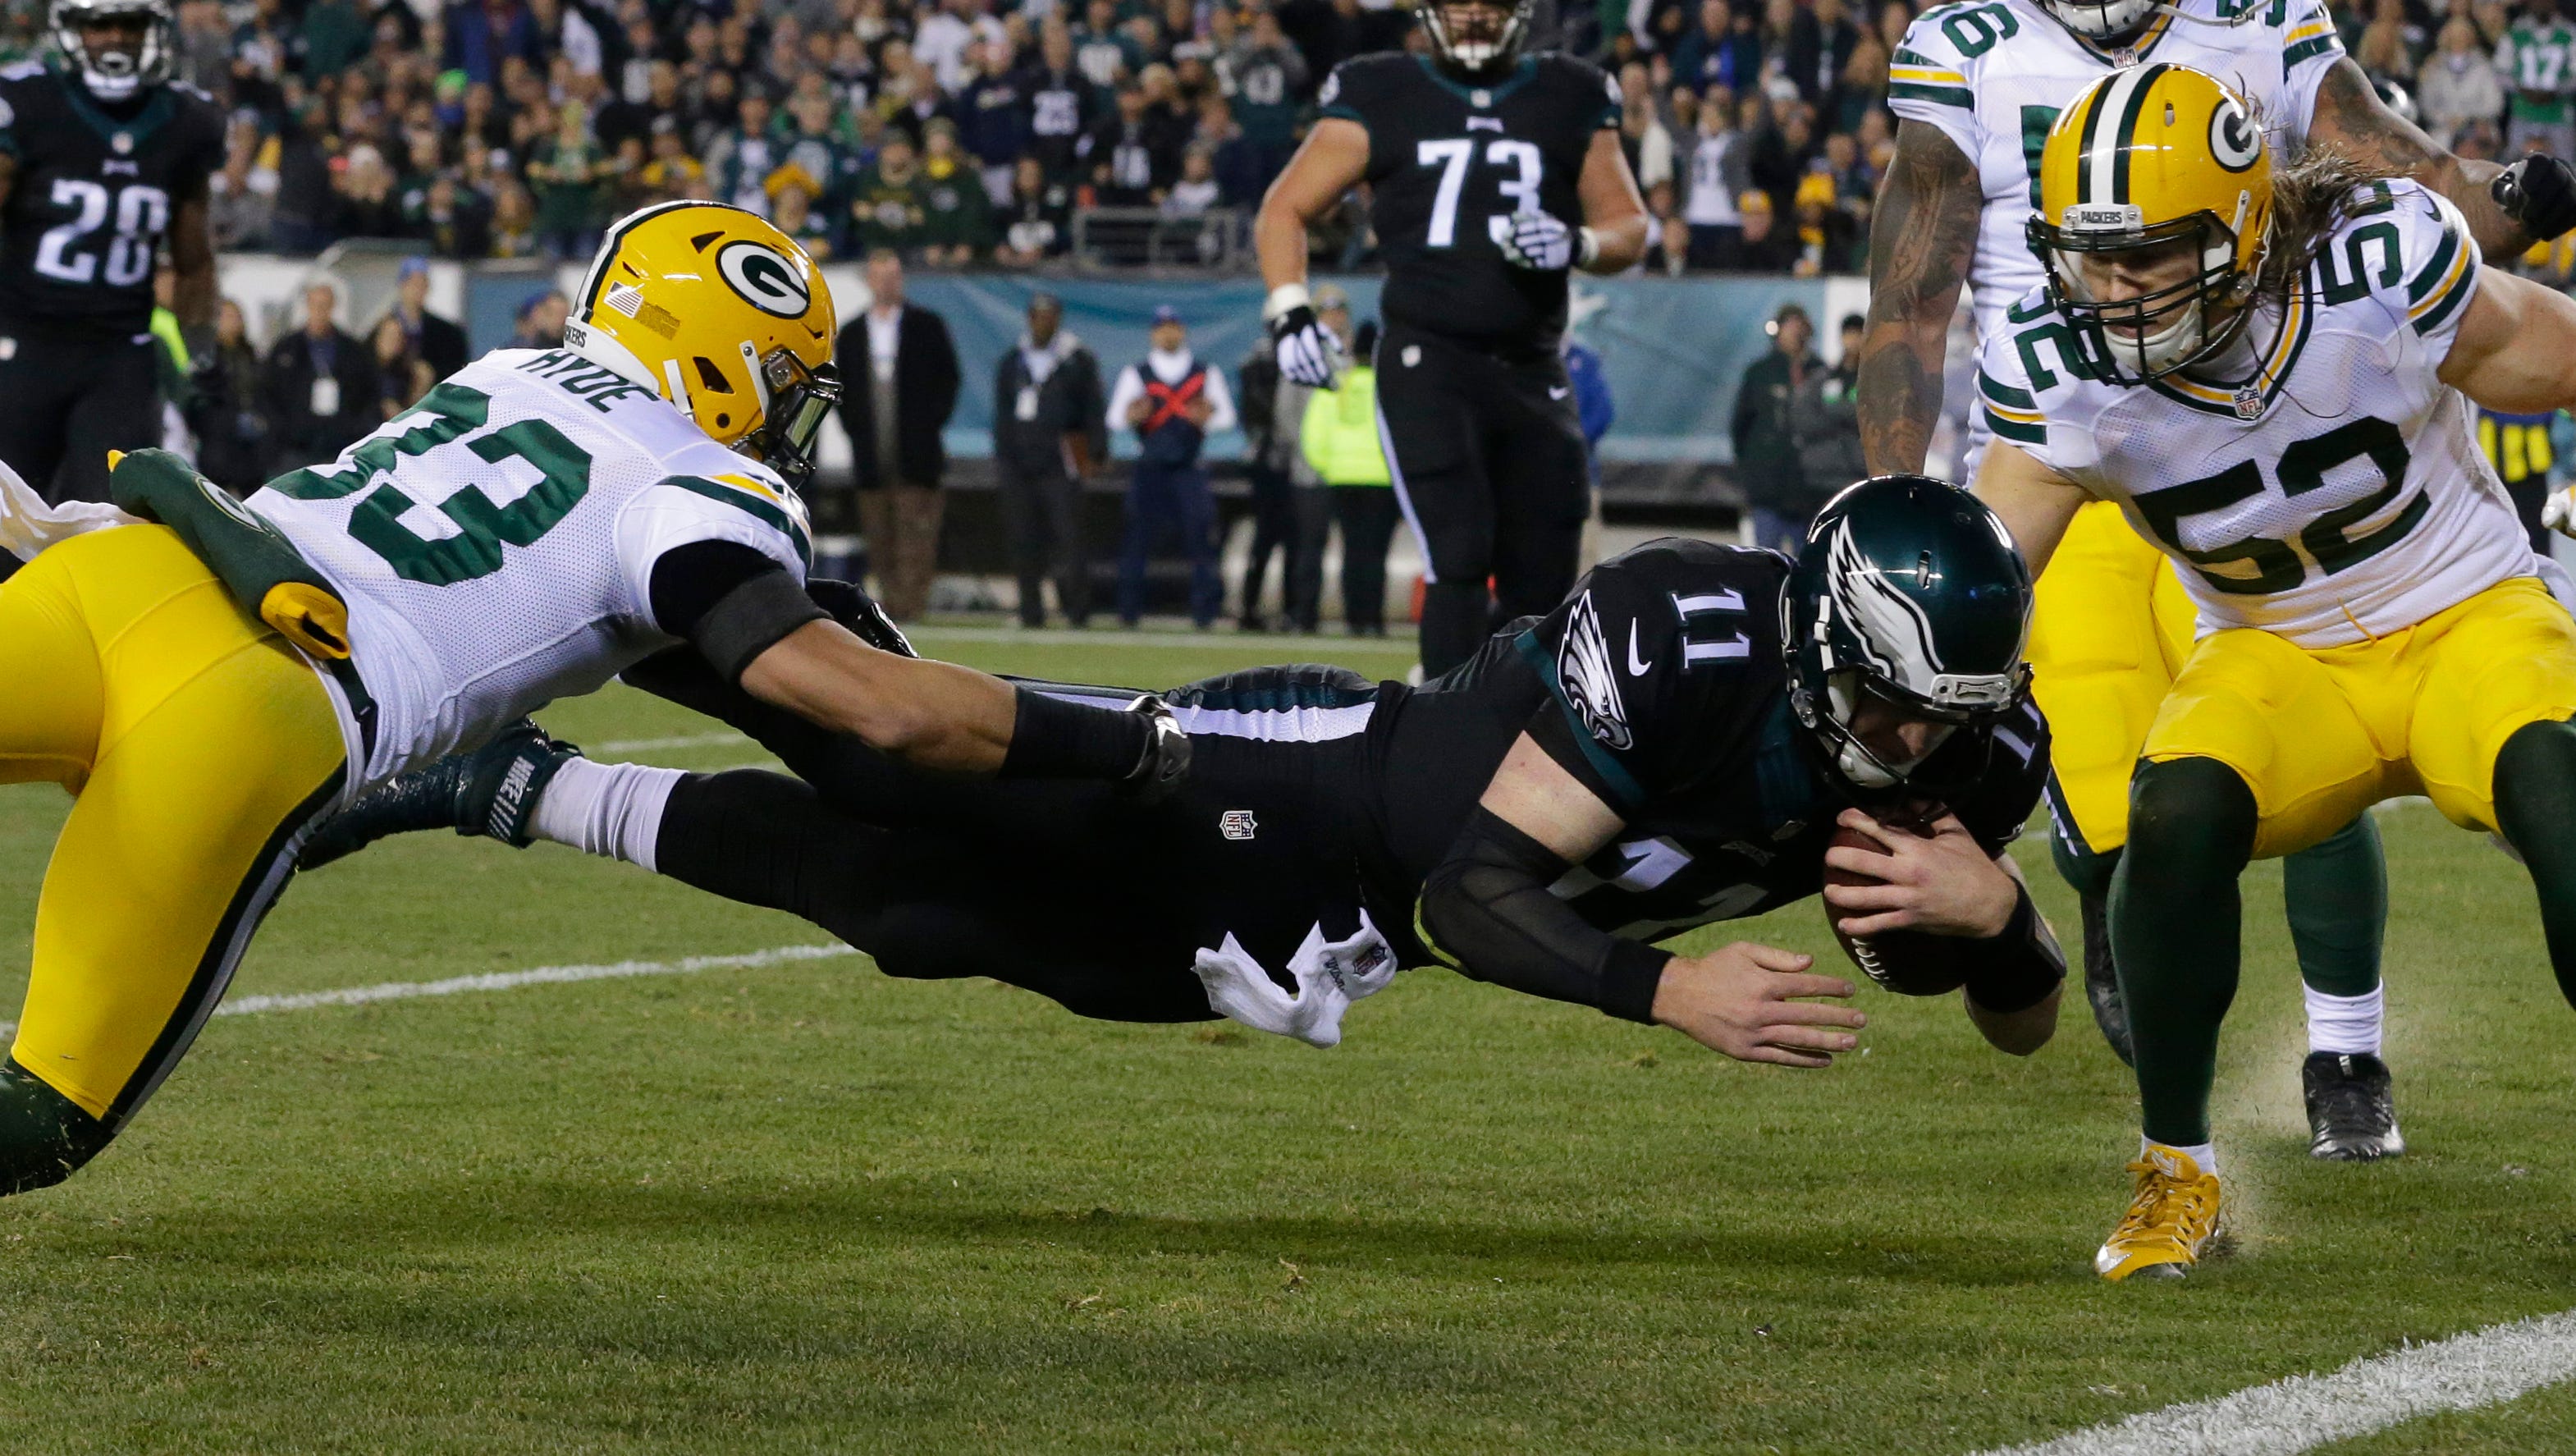 Philadelphia Eagles quarterback Carson Wentz (11) dives past Green Bay Packers strong safety Micah Hyde (33) and outside linebacker Clay Matthews (52) to scores a touchdown during the first quarter of their game Monday, November 28, 2016 at Lincoln Financial Field in Philadelphia, Penn.